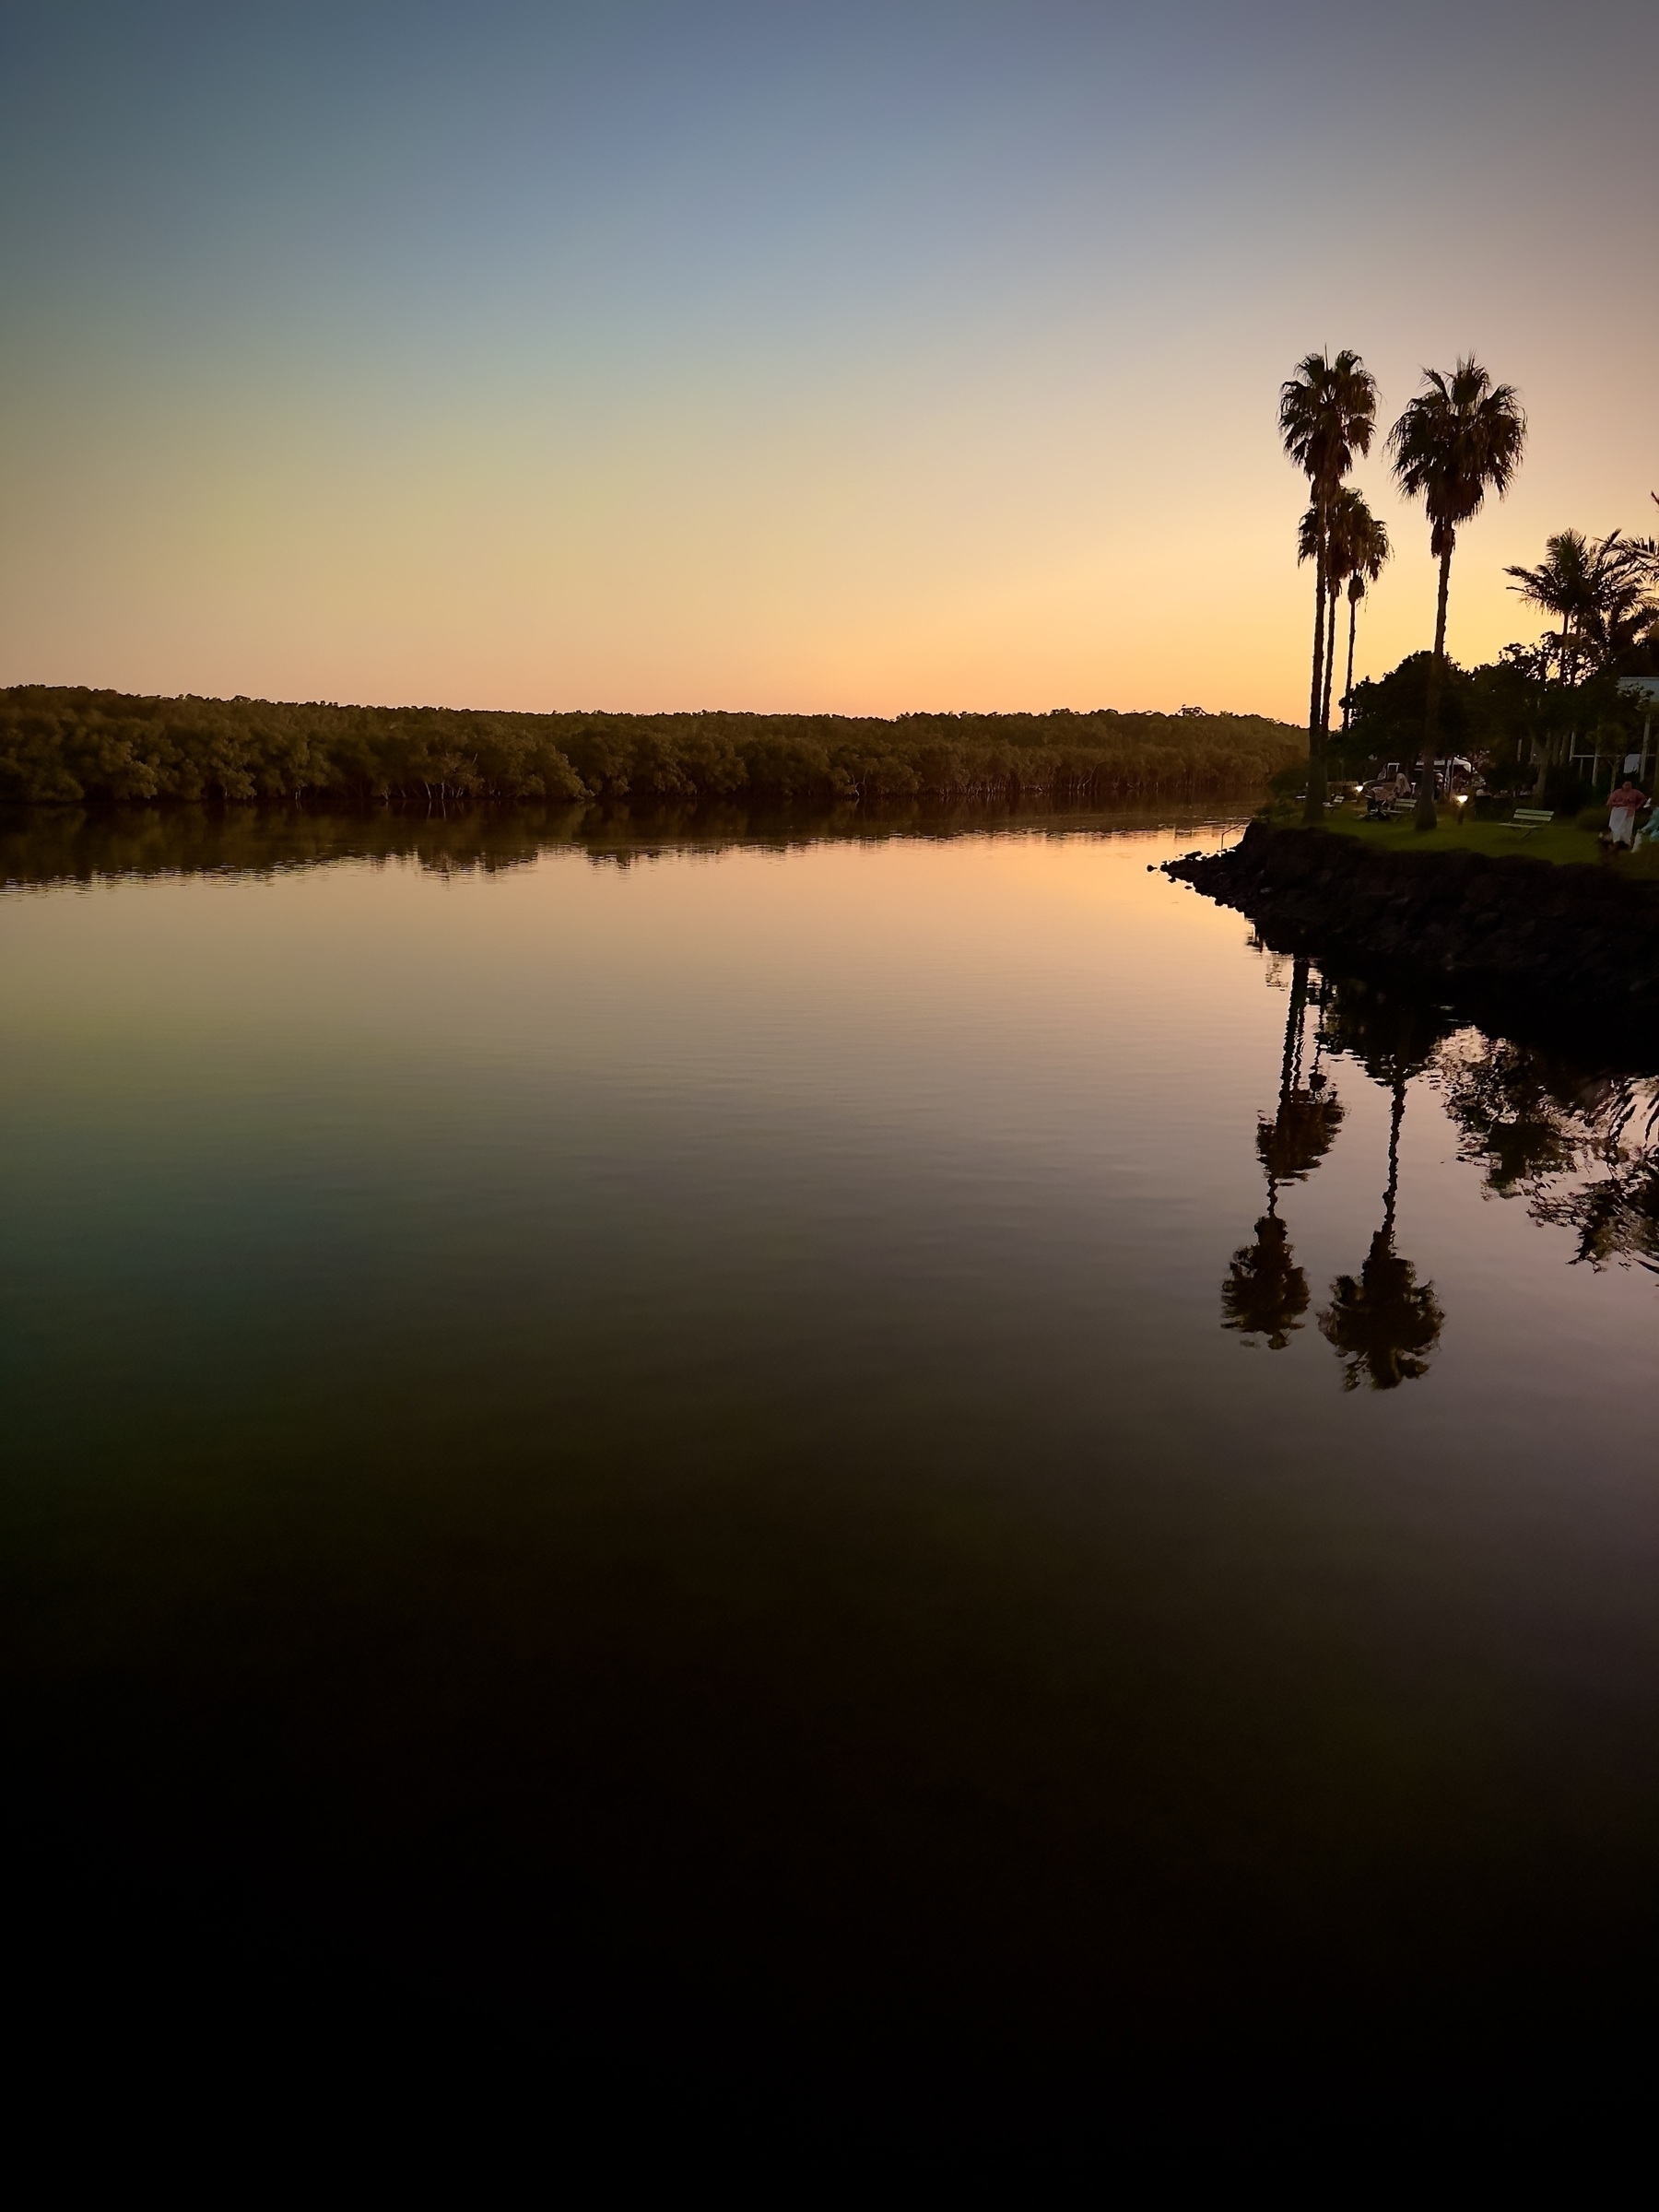 Sunset look out across a river bend, palm trees on the shoreline reflected in the glassy water. The orange pink fading light reflected in the water defines its path and outlines the far bank.